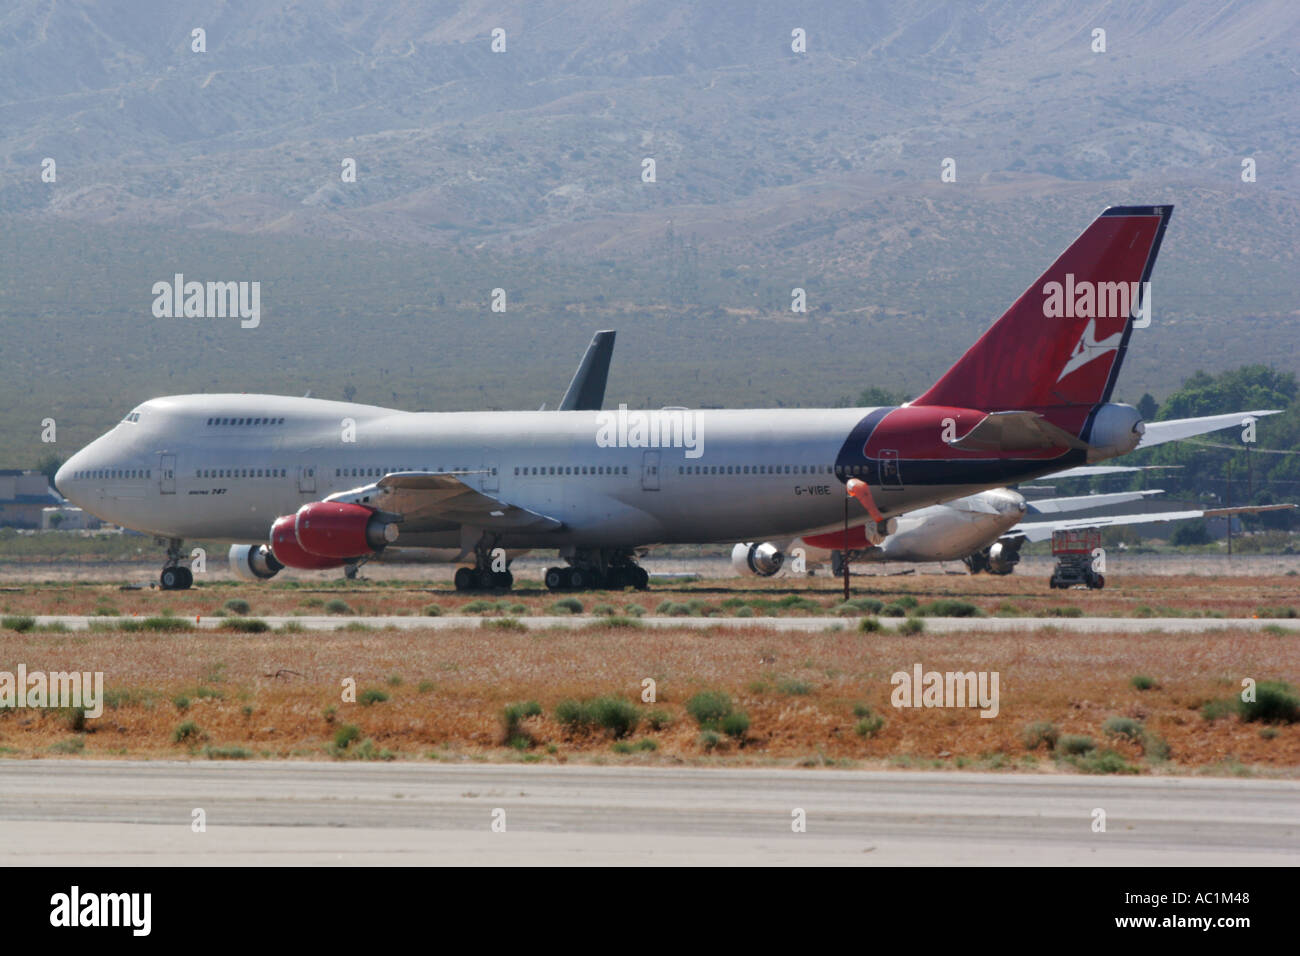 Mojave Airport California USA desert storage area for decommissioned aeroplanes airplanes Heat Haze Stock Photo